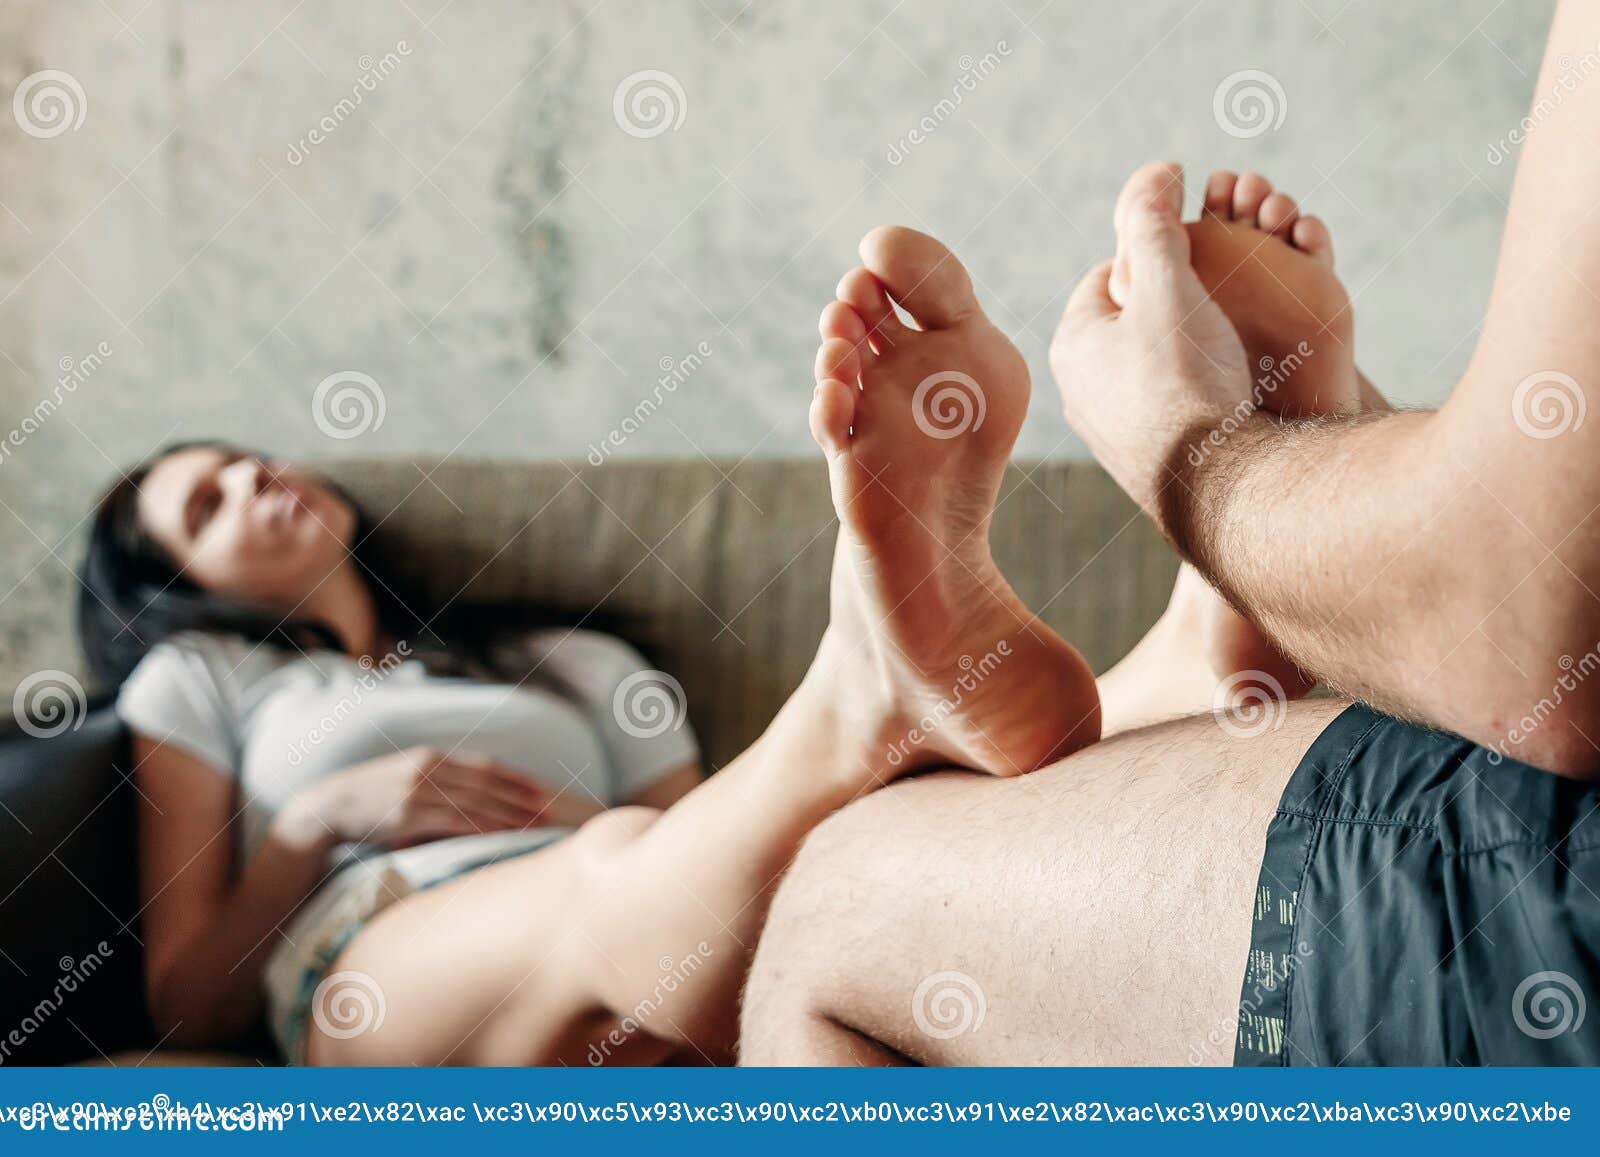 Close-up of Female Legs Receiving a Foot Massage from Her Husband pic